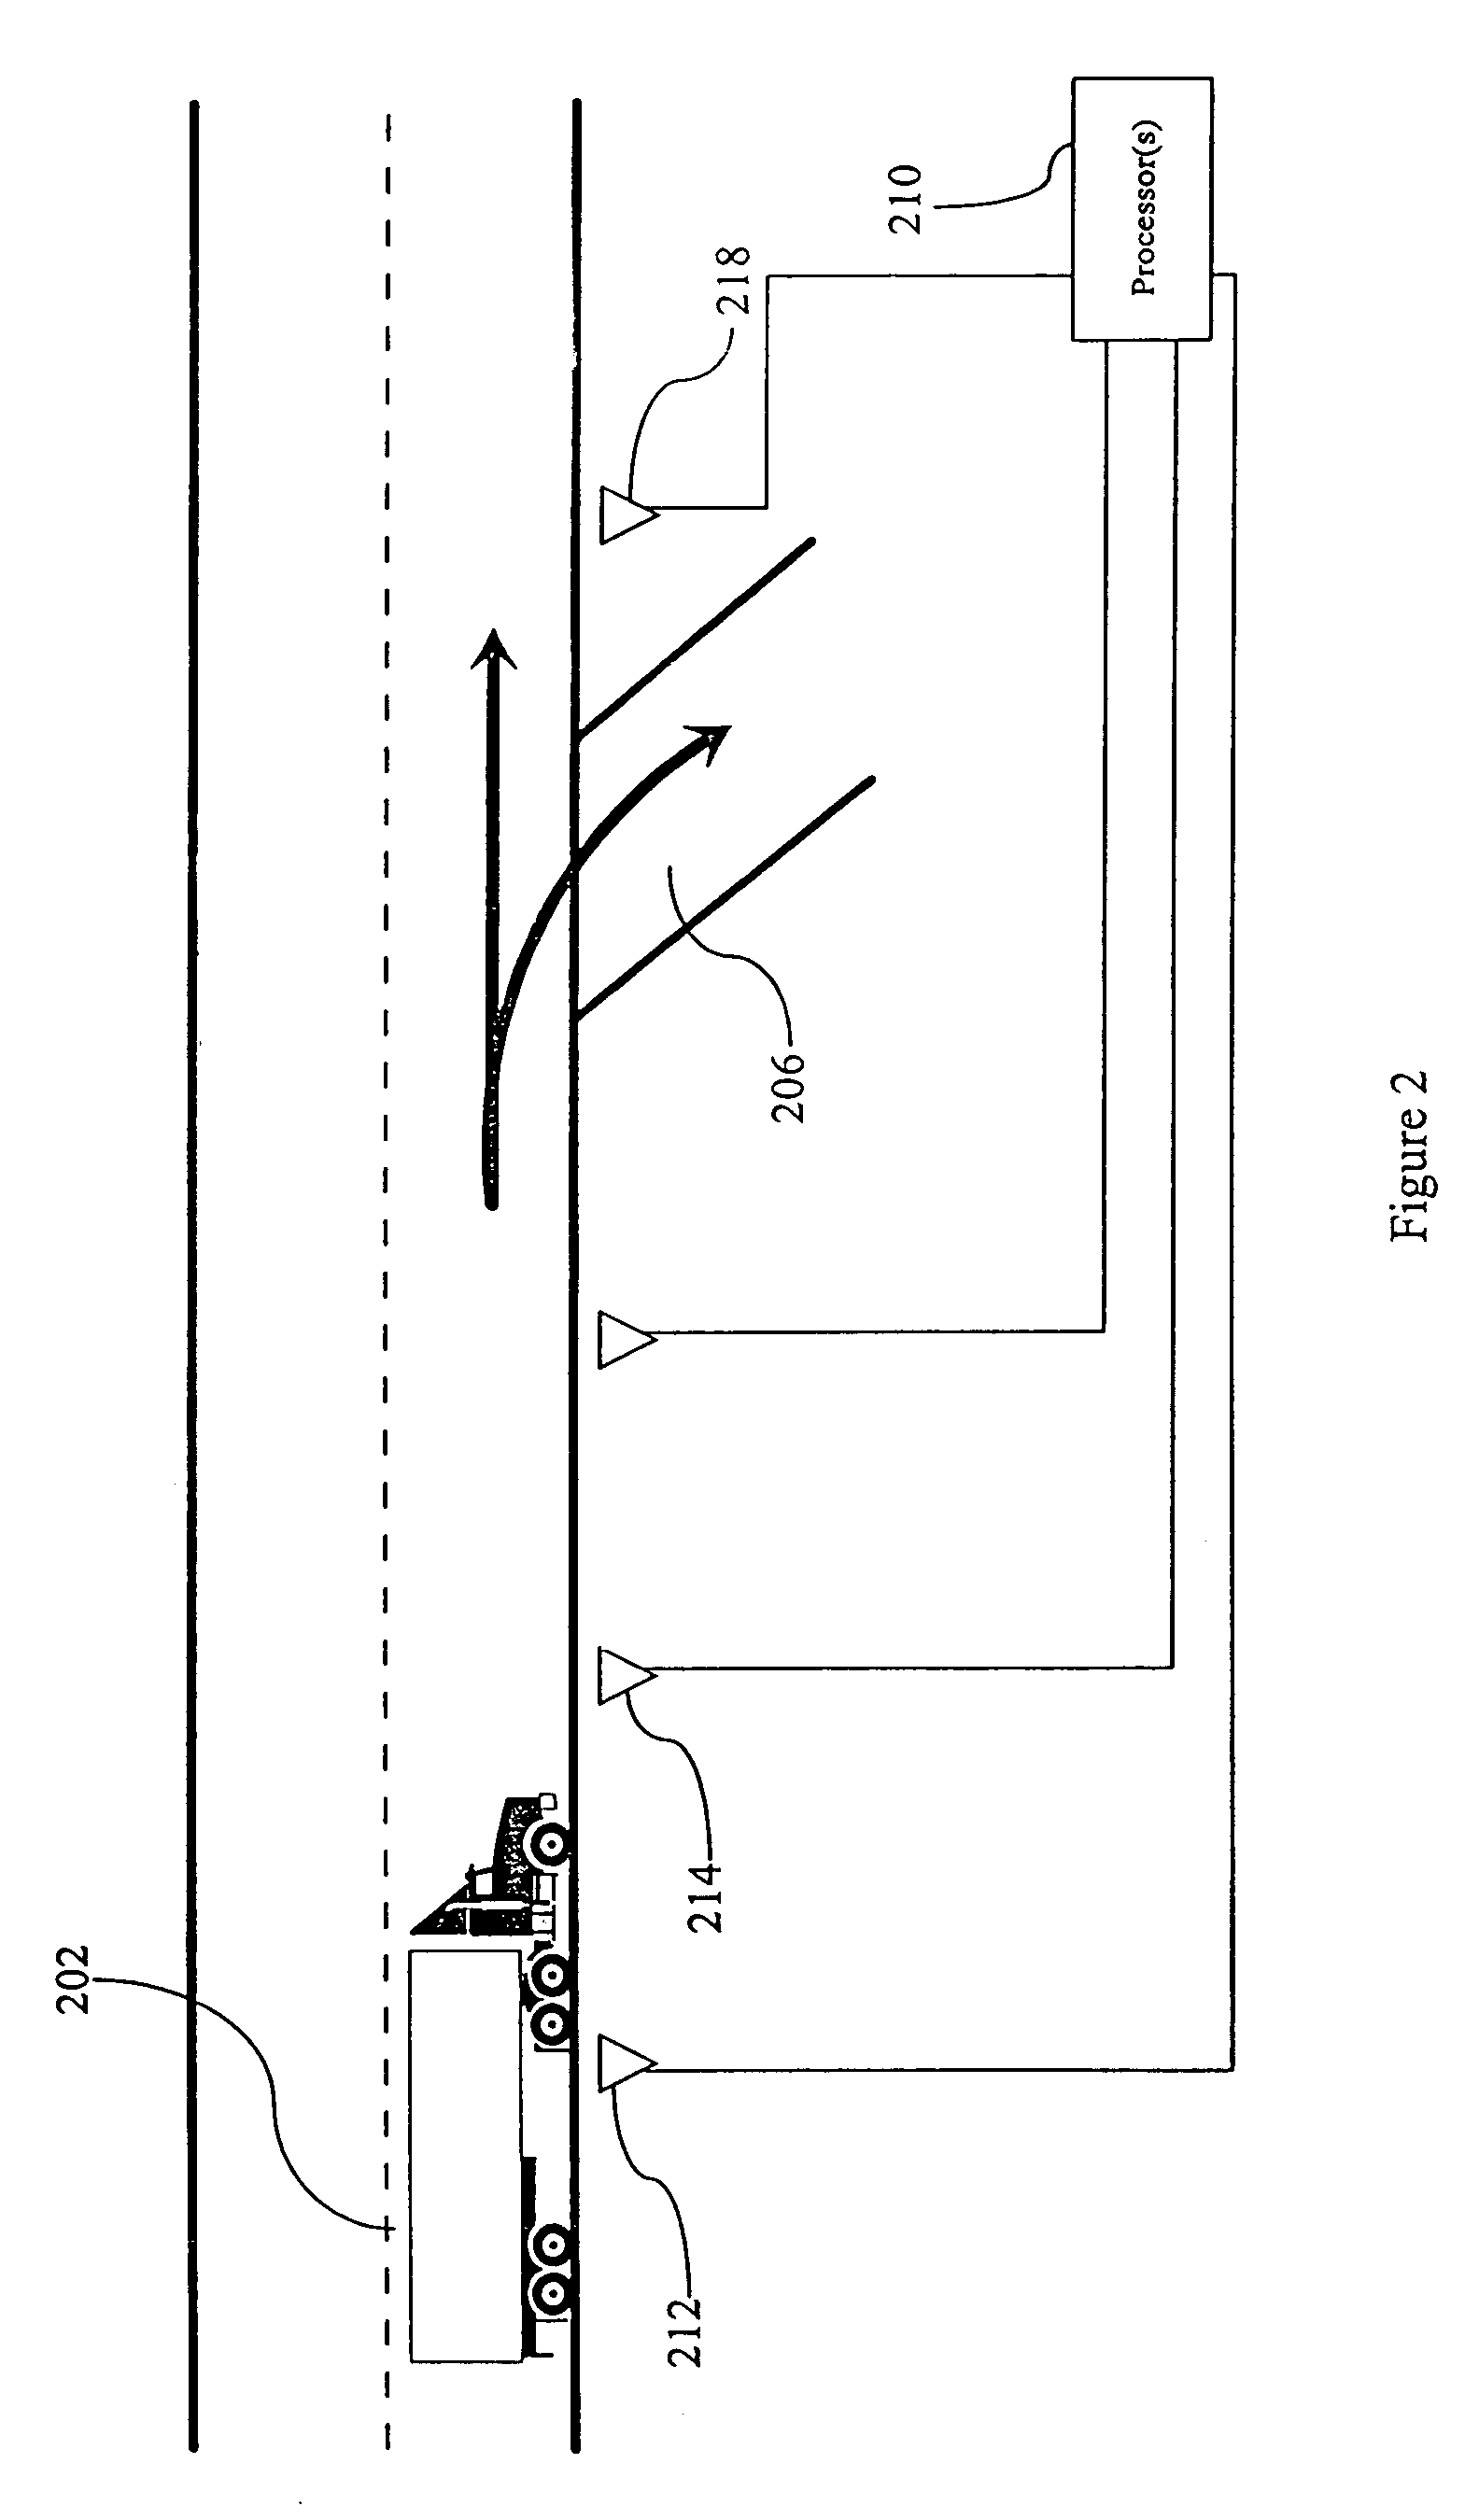 Commercial vehicle electronic screening hardware/software system with primary and secondary sensor sets